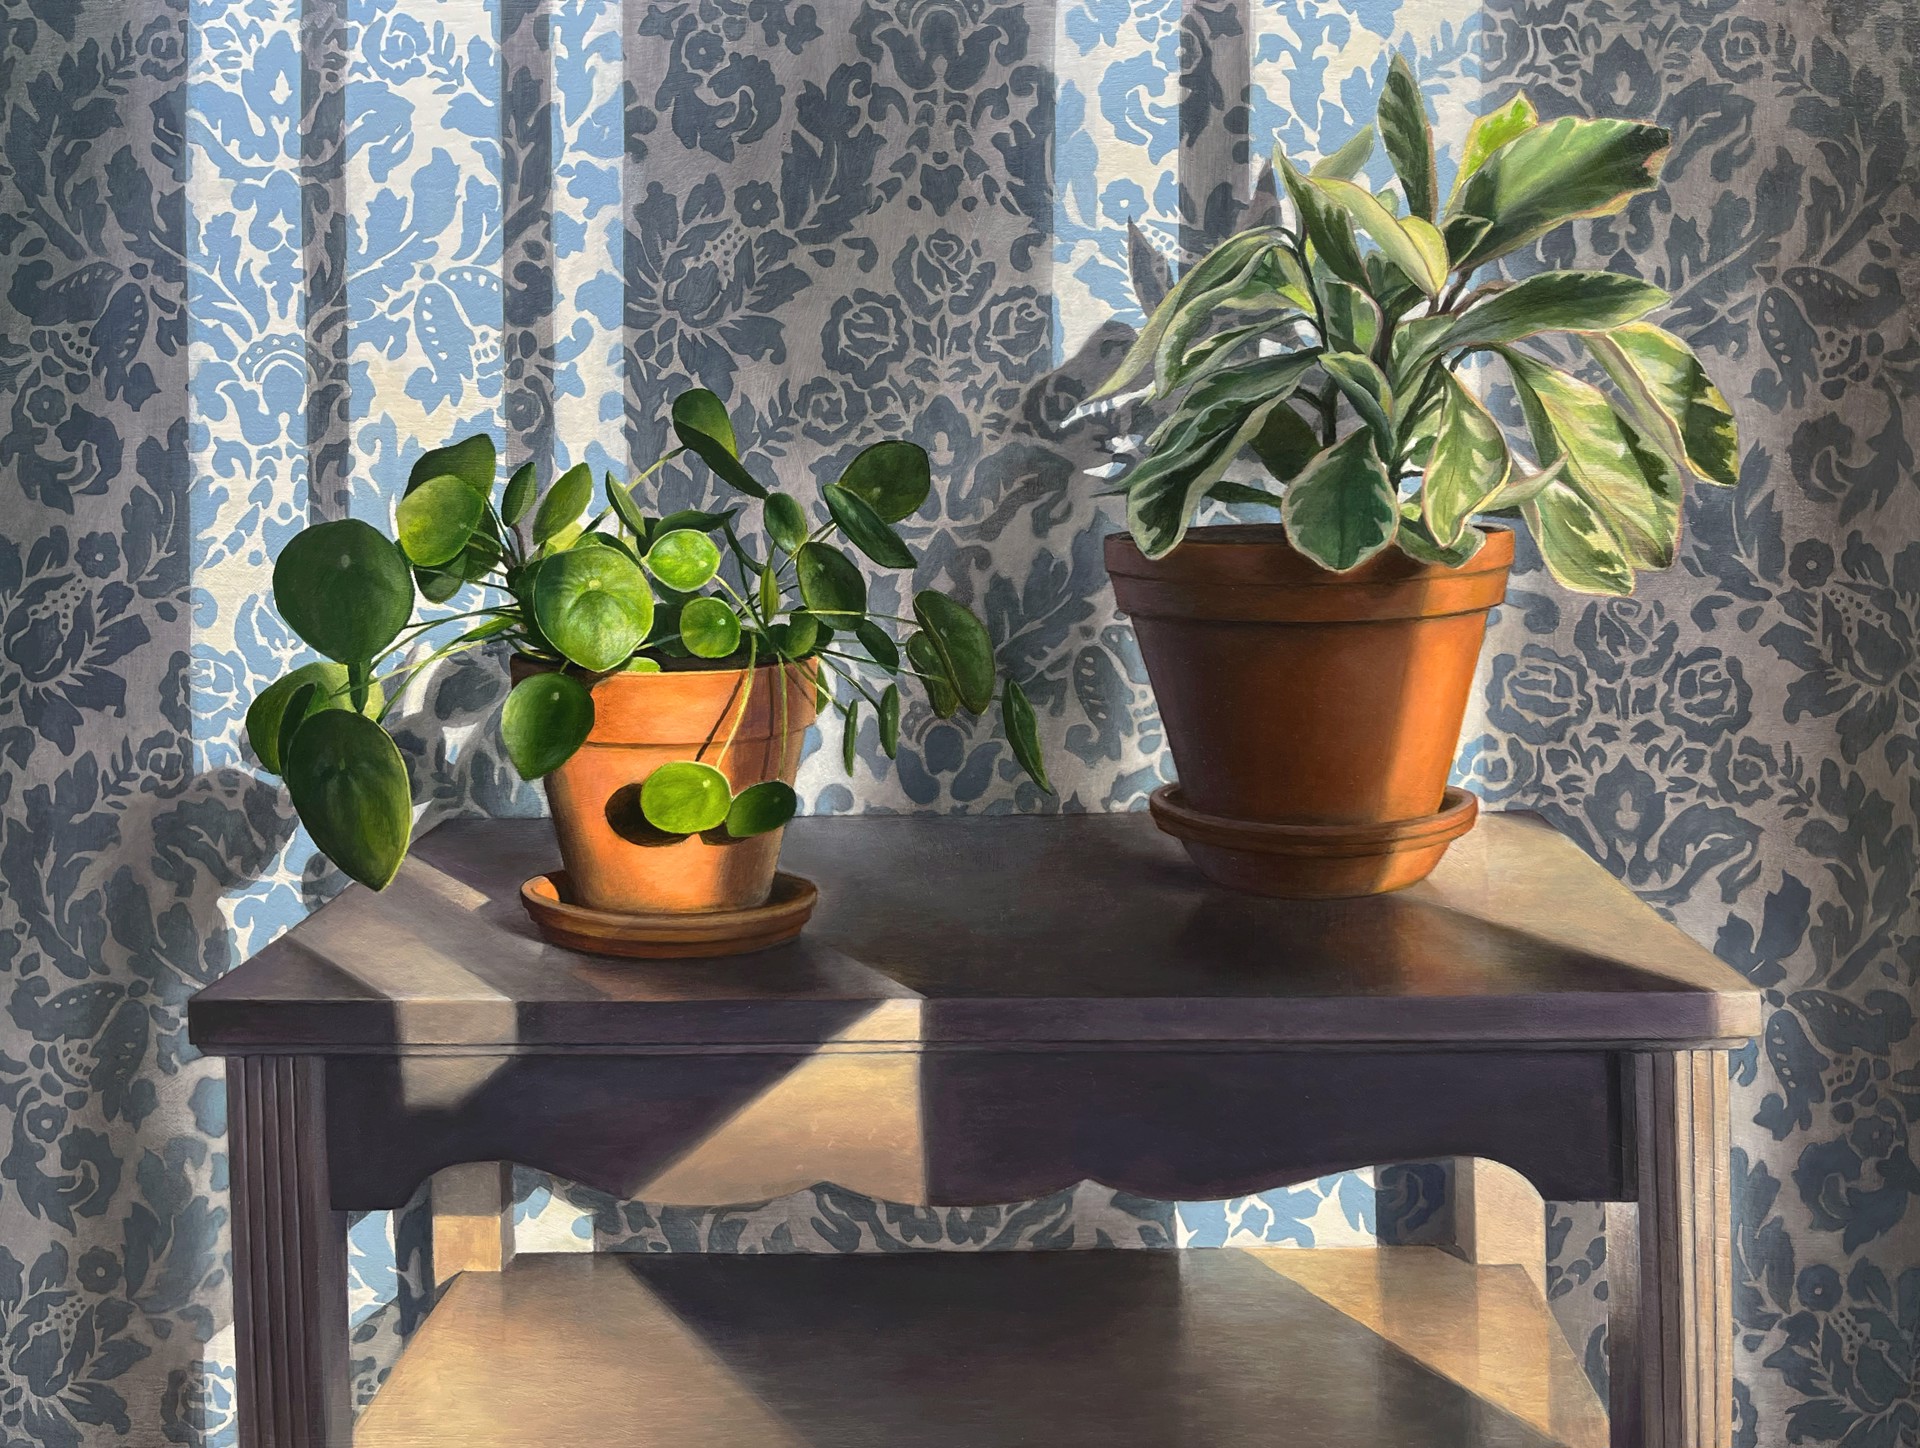 Two Houseplants in Window Light by Michael Banning